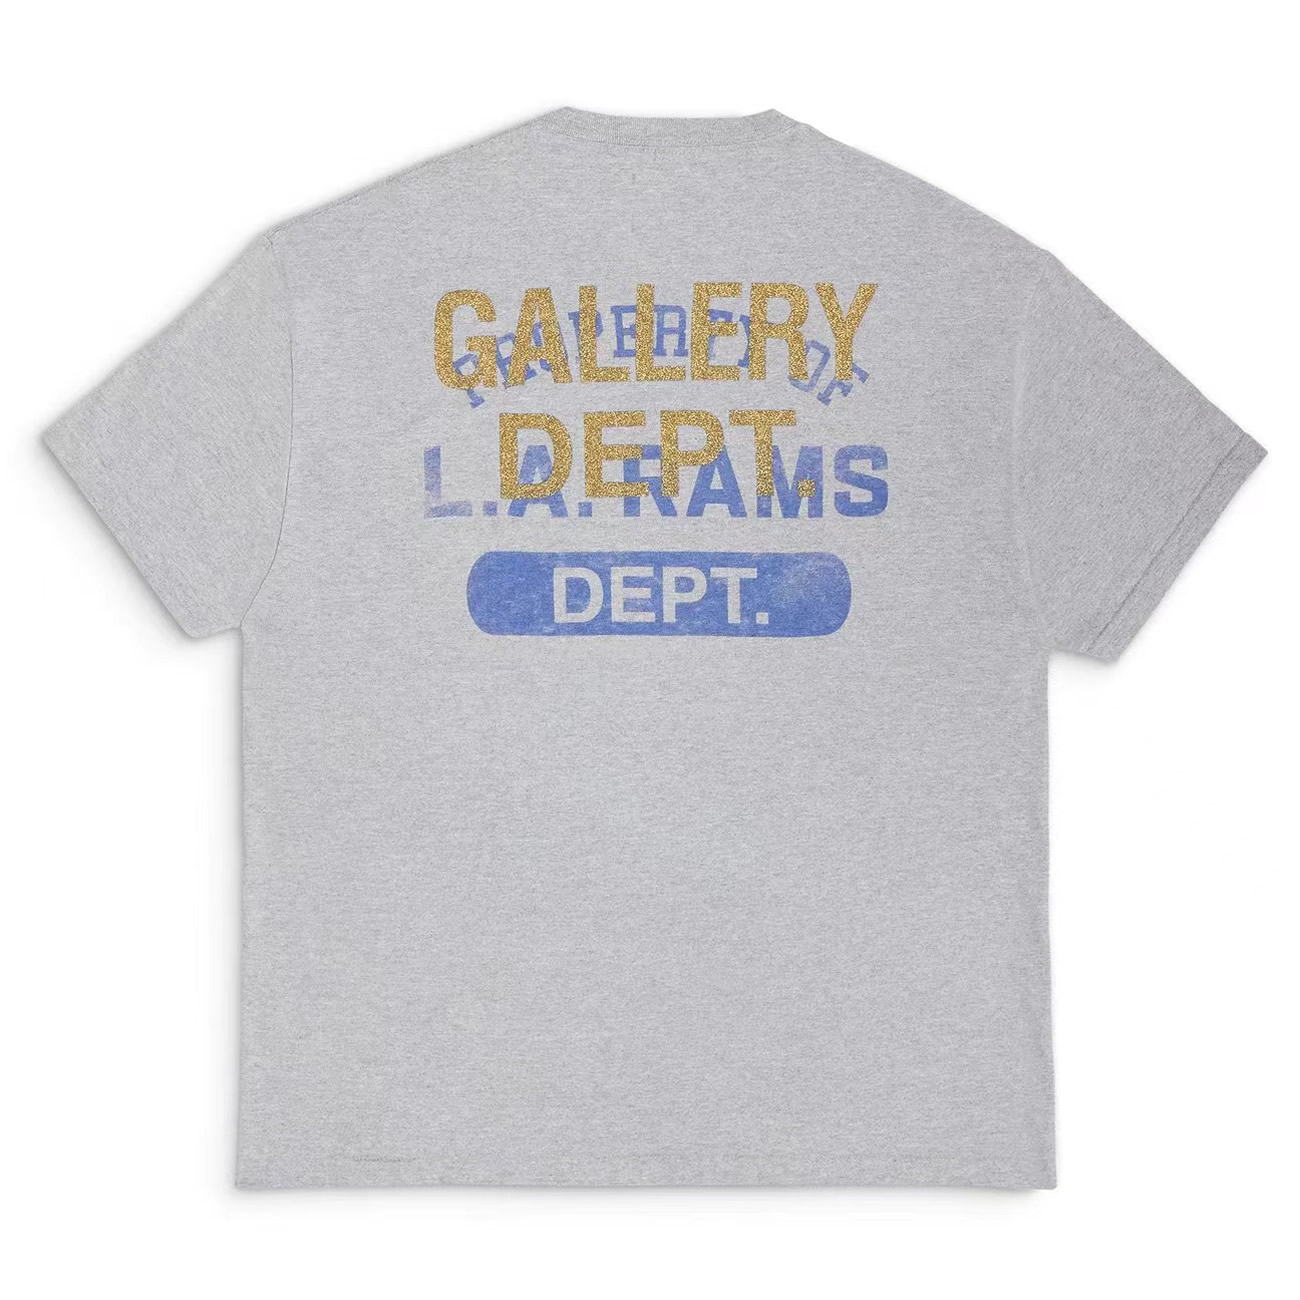 Gallery Dept X La Rams Color Block Tee Rams Co Branded Old Print Contrast Short Sleeve T Shirt (2) - newkick.org